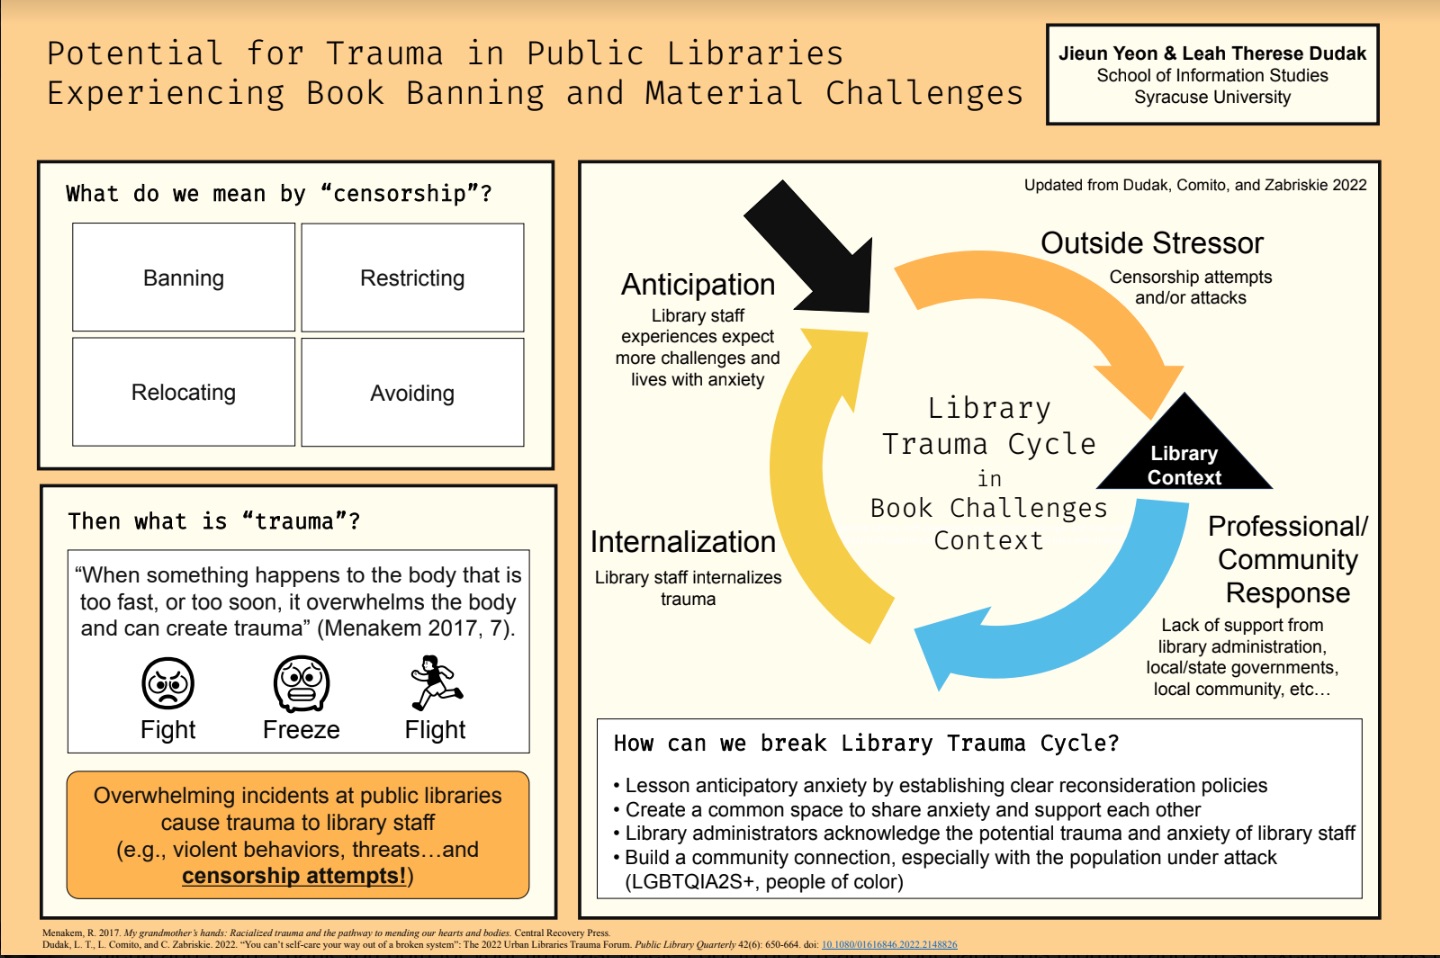 Image of the trauma cycle by Jieun Yeon and Leah Therese Dudak.